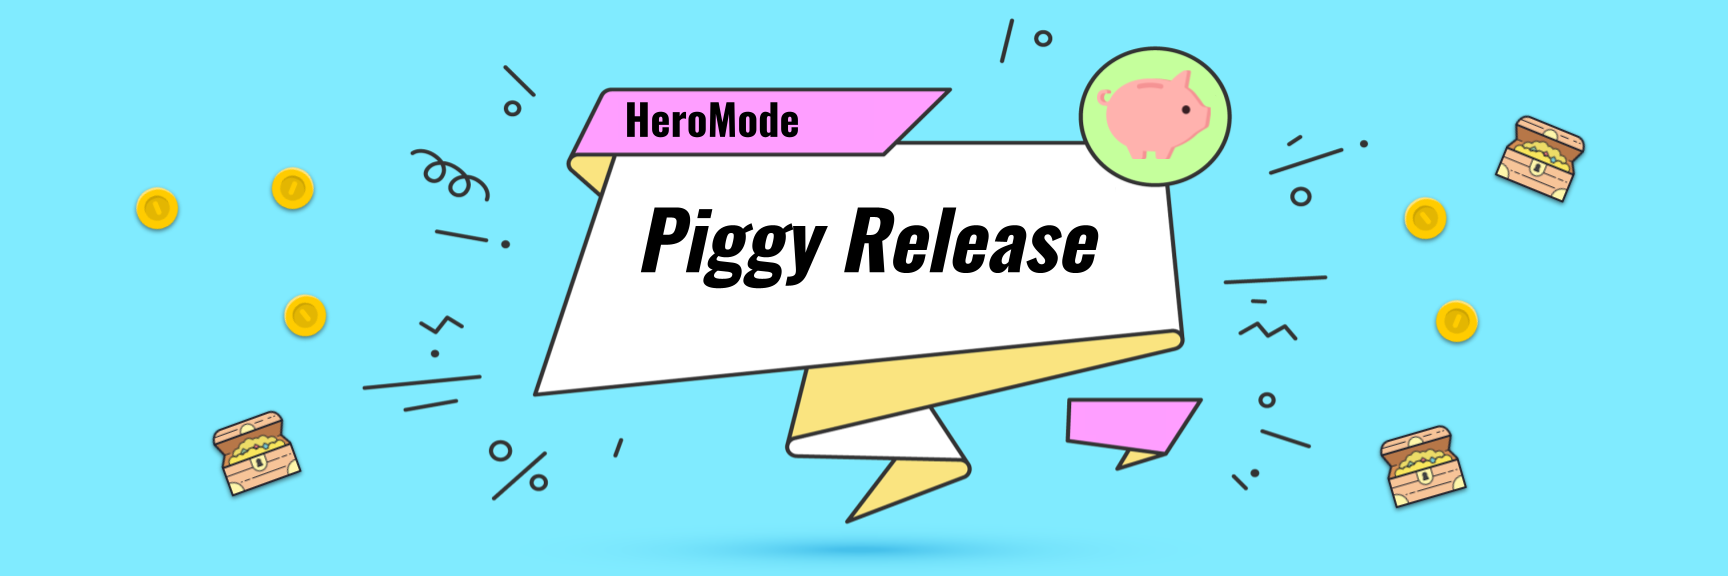 HeroMode piggy rewards system now available!